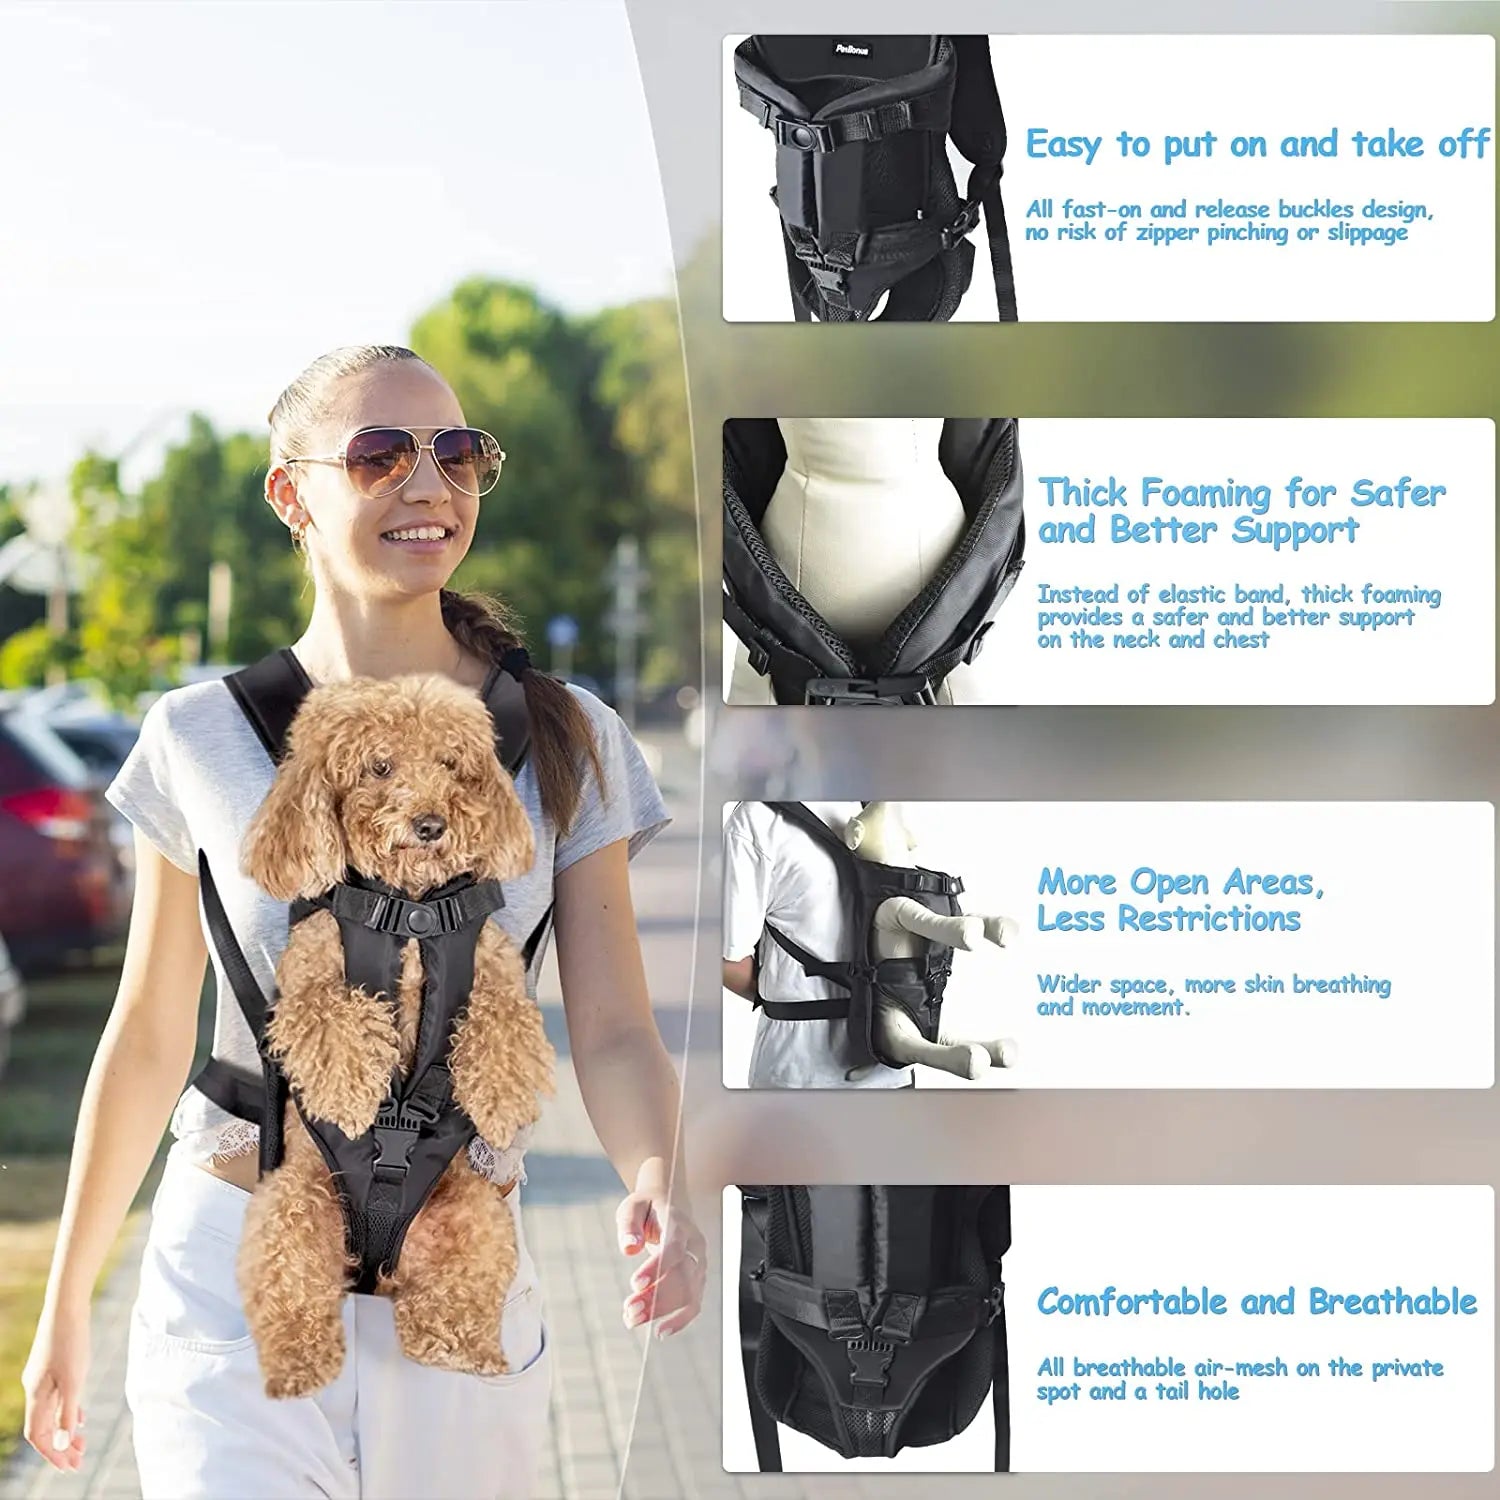 Pet Backpack Carrier For Cat Dogs Front Travel Dog Bag Carrying For Animals Small Medium Dogs Bulldog Puppy Mochila Para Perro